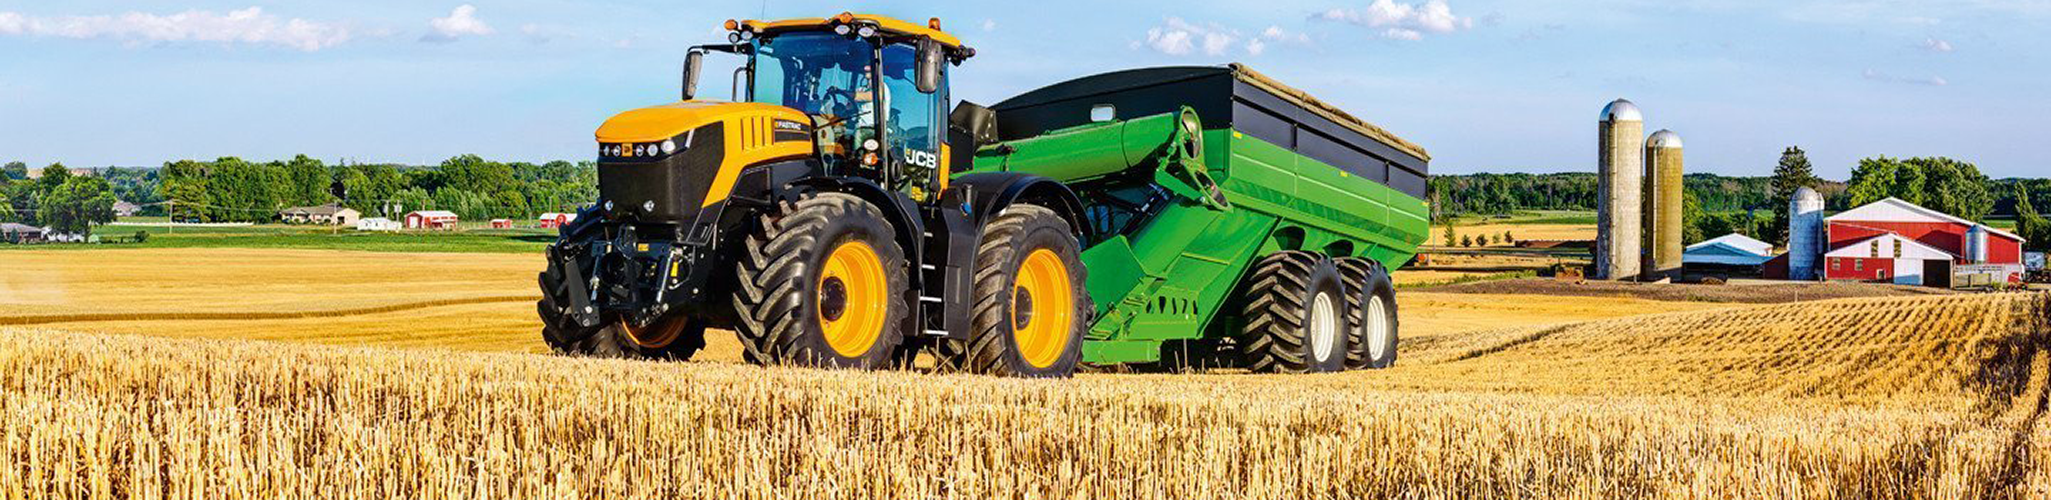 Equipment for agricultural machinery - Wema UK